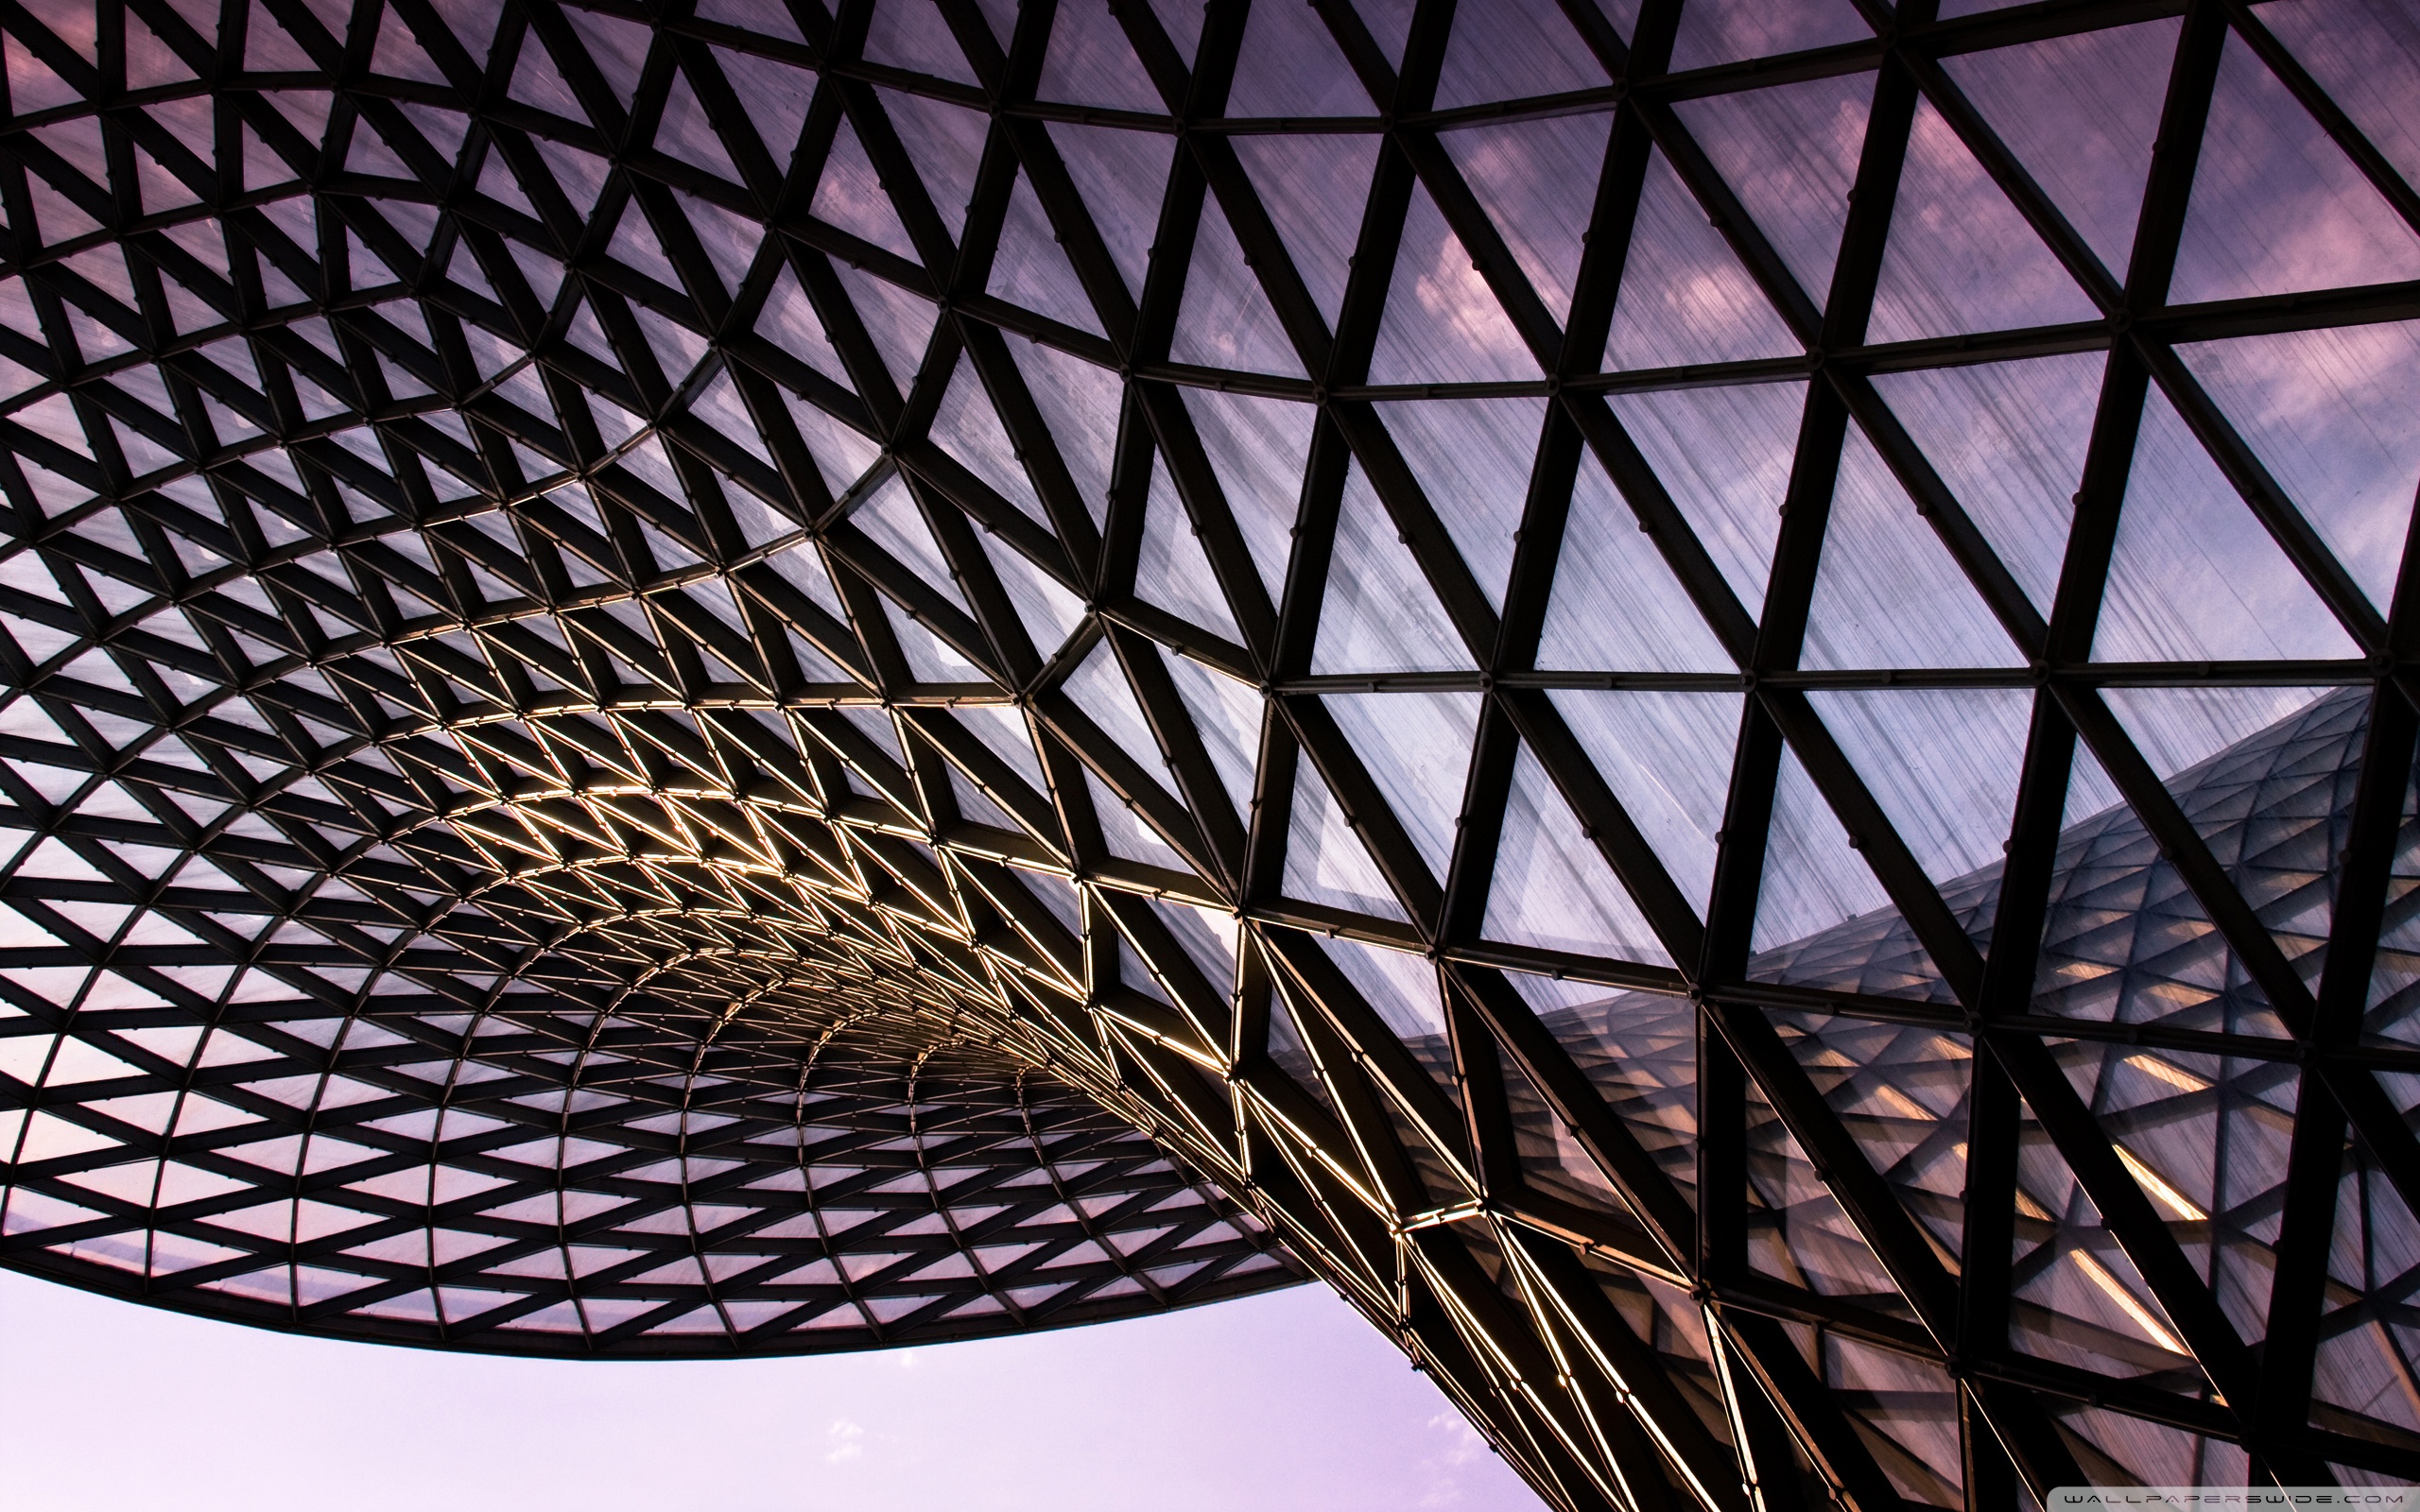 Abstract Architecture Photos Download The BEST Free Abstract Architecture  Stock Photos  HD Images